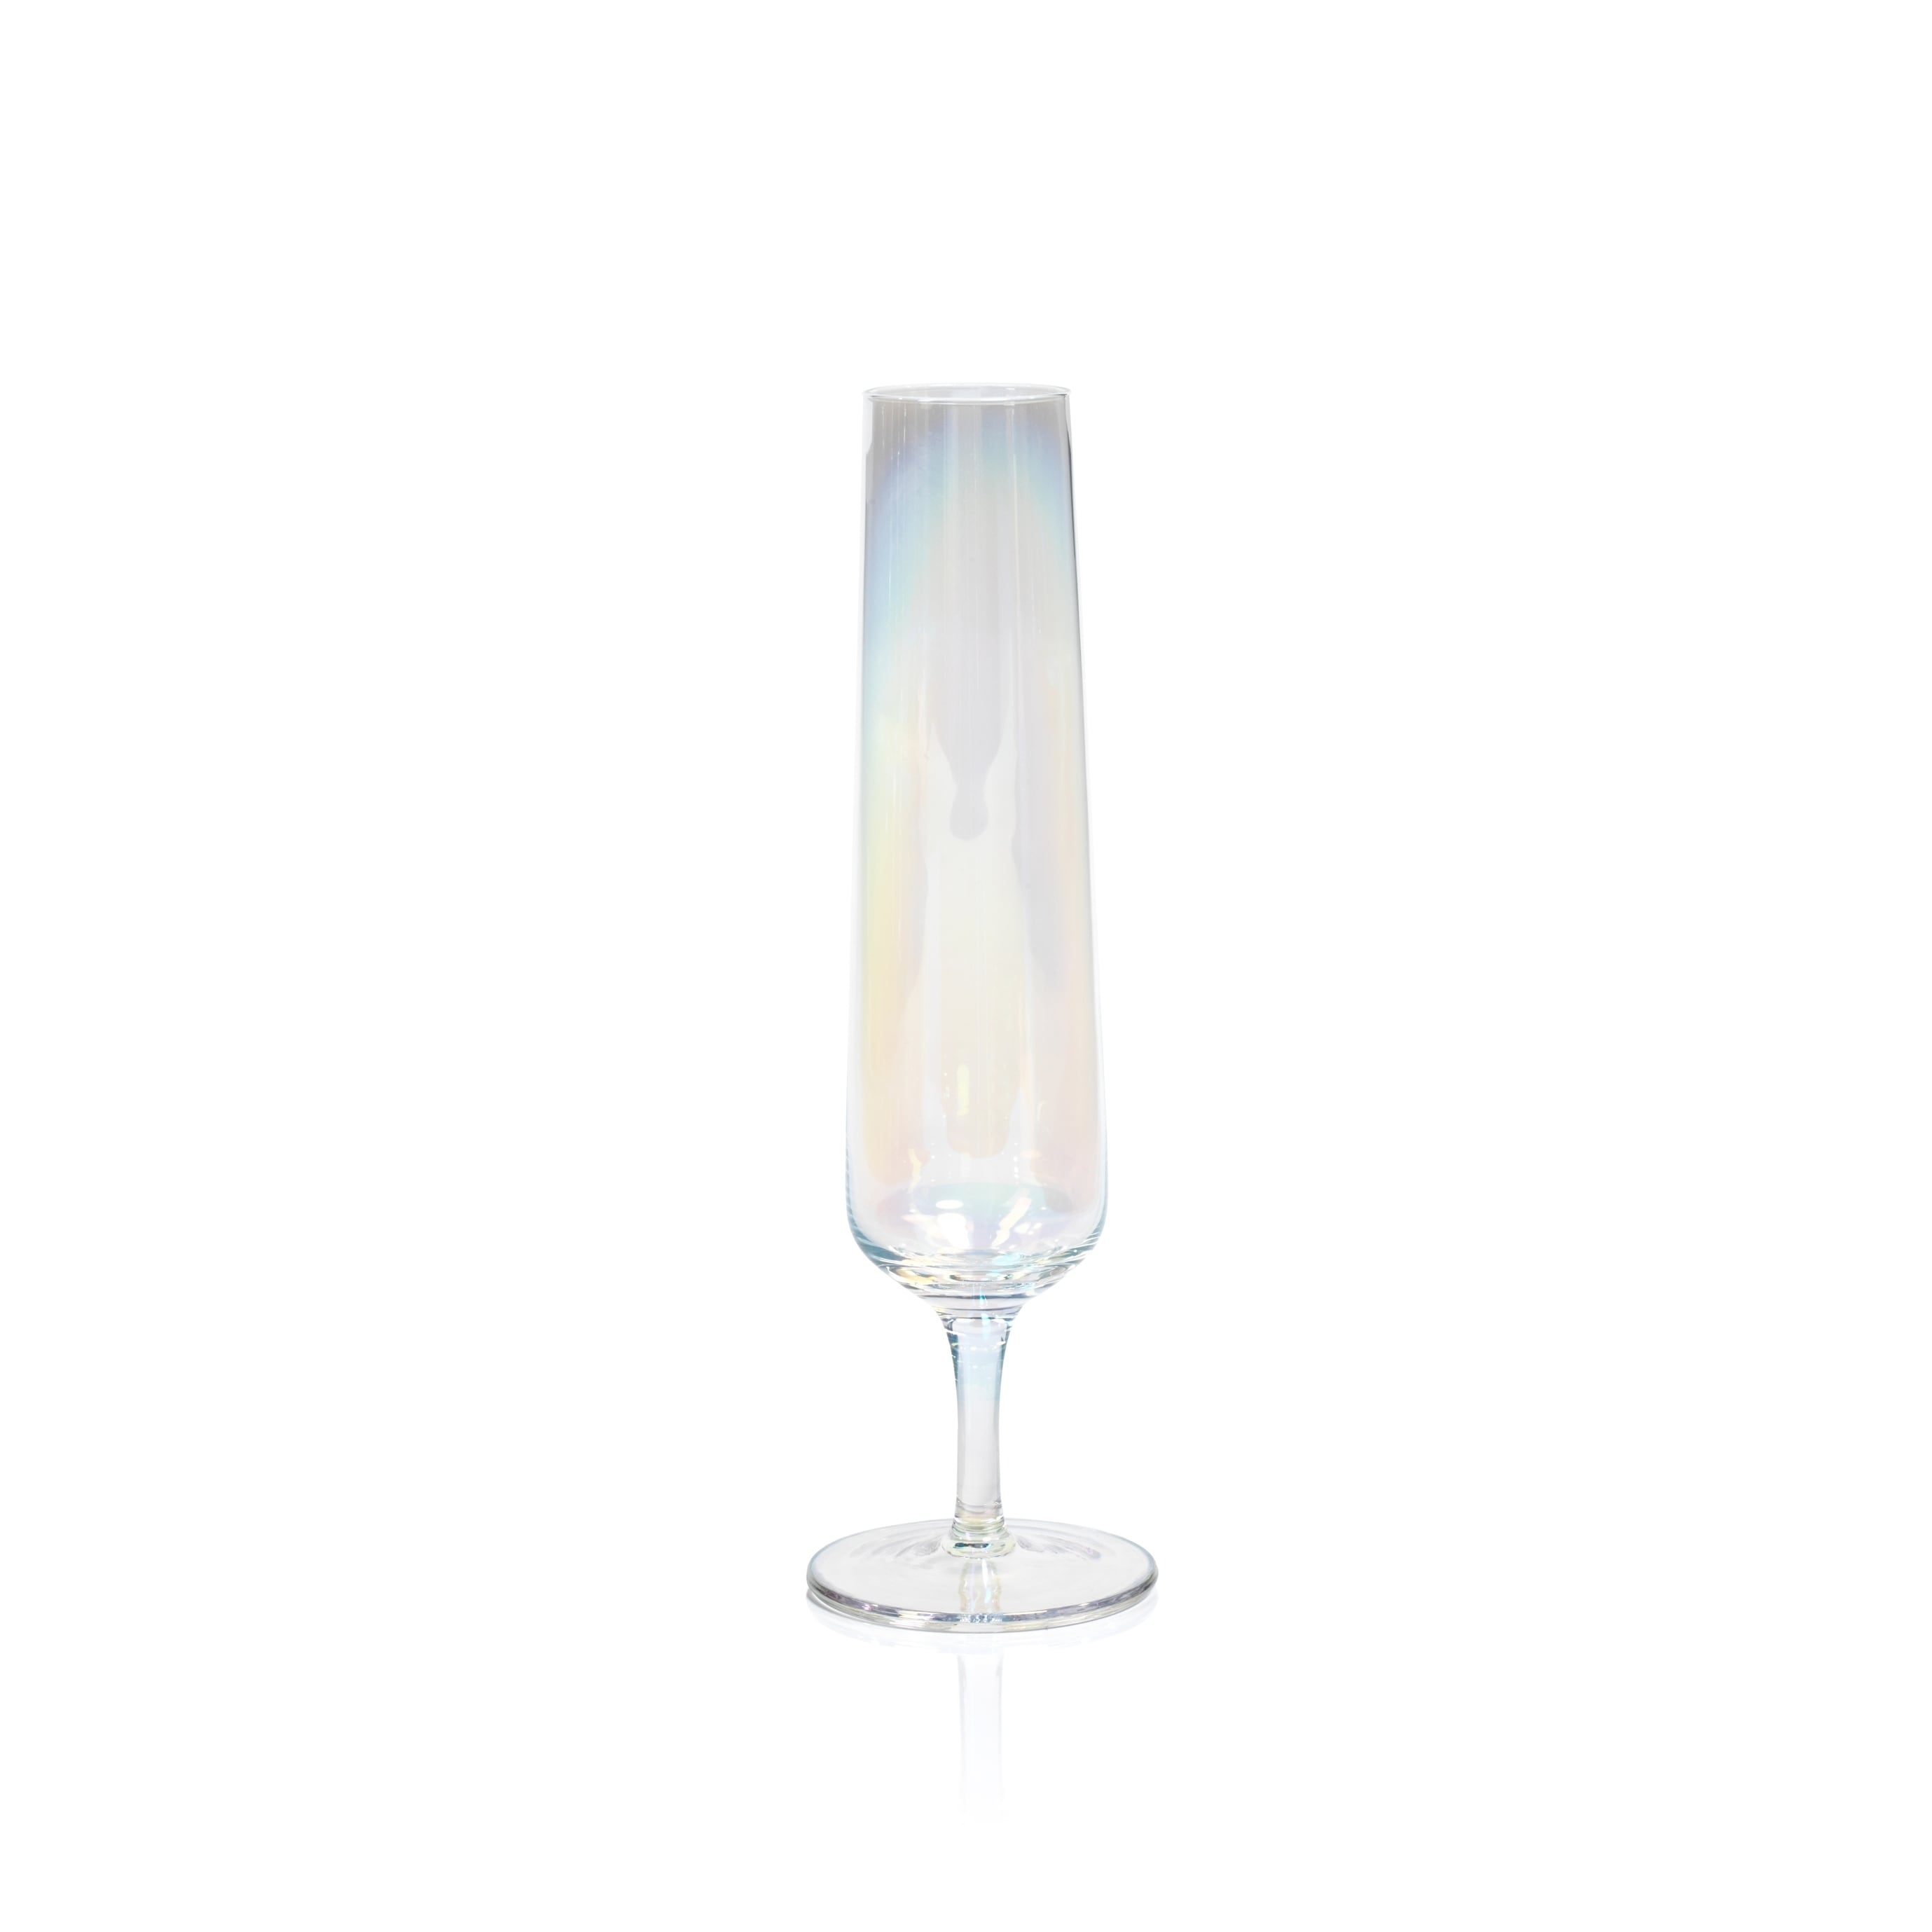 https://ak1.ostkcdn.com/images/products/23111432/9.25-Tall-Glass-Festive-Iridescent-Champagne-Flutes-Set-of-6-Set-of-6-eb9638a7-1c33-4a50-bb81-250175513c88.jpg